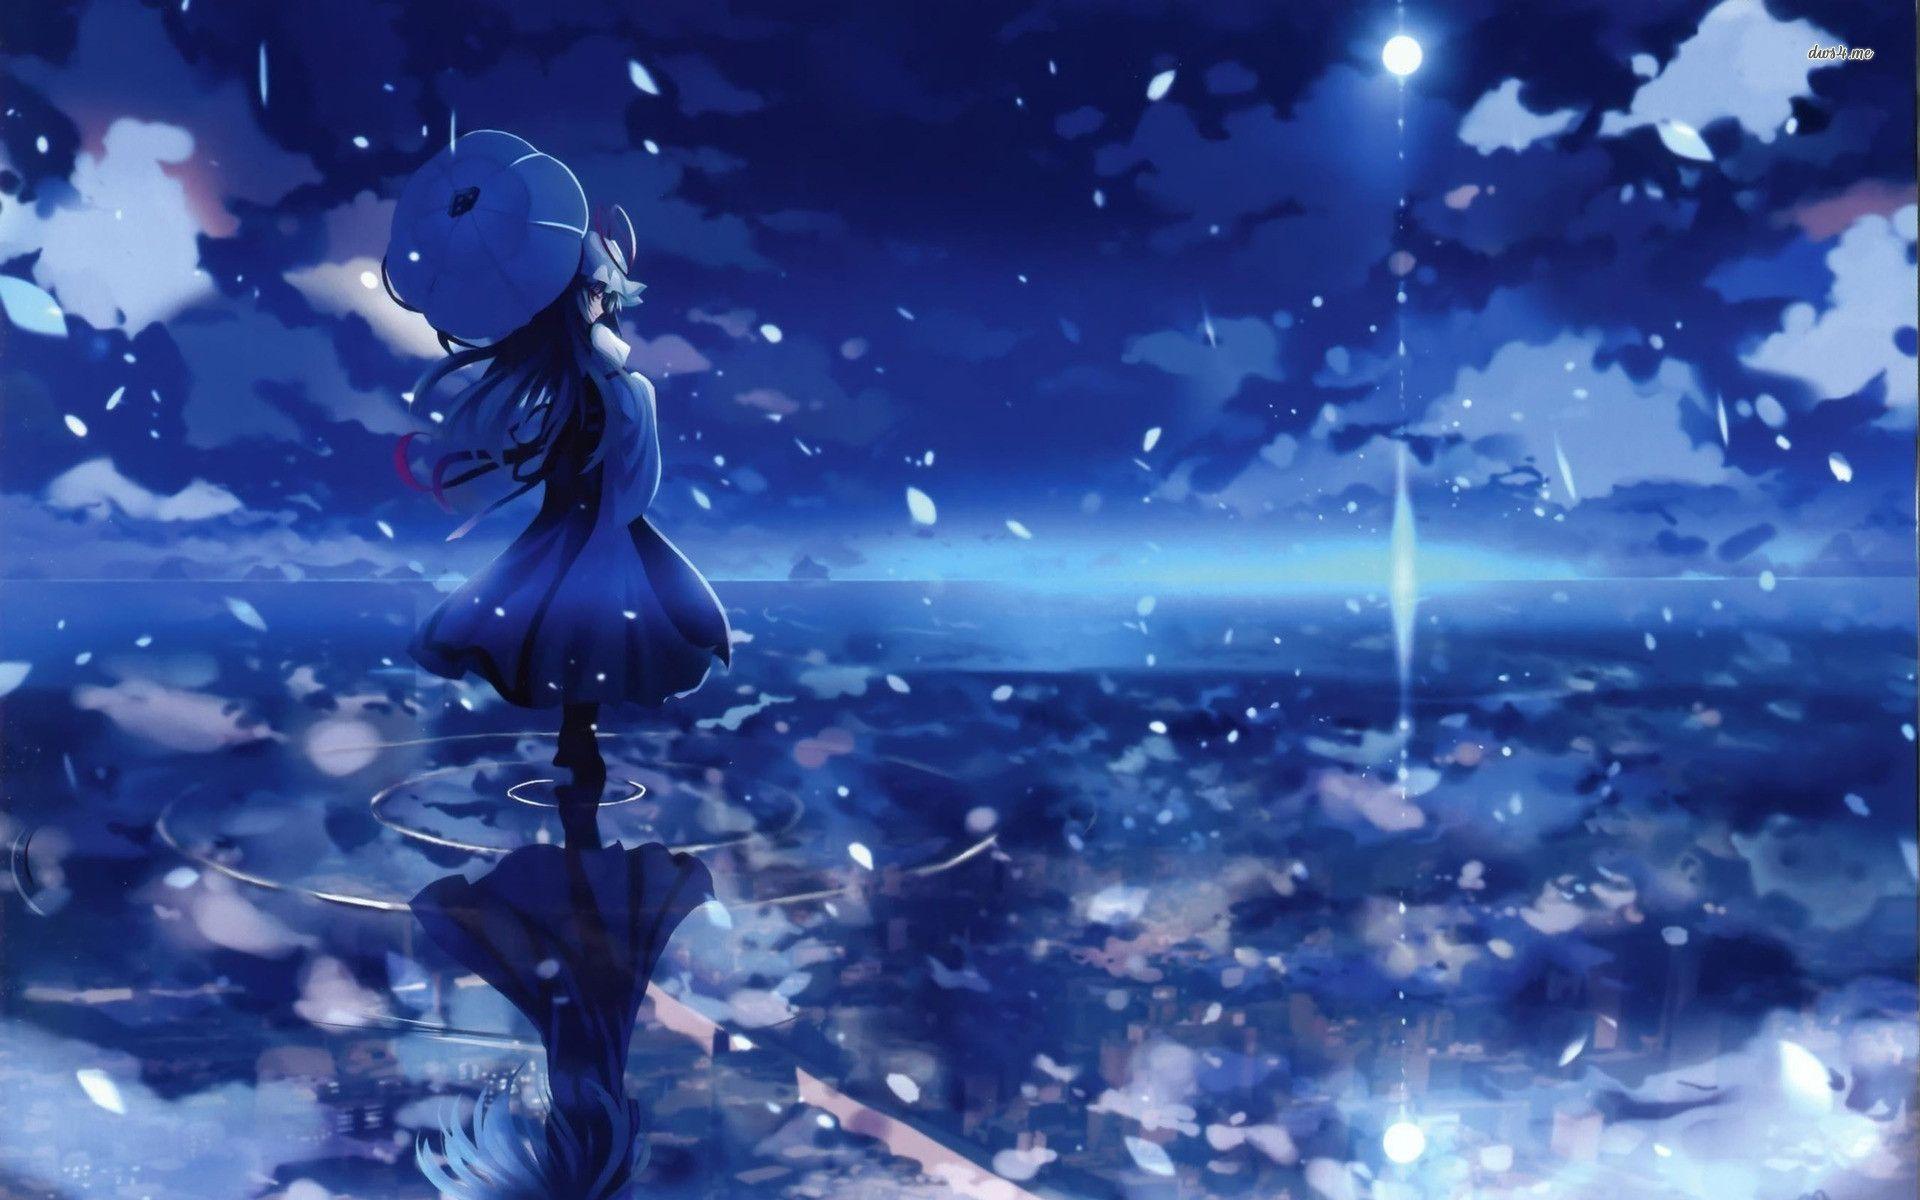 Touhou Project Anime Wallpaper 1920x1200 px Free Download